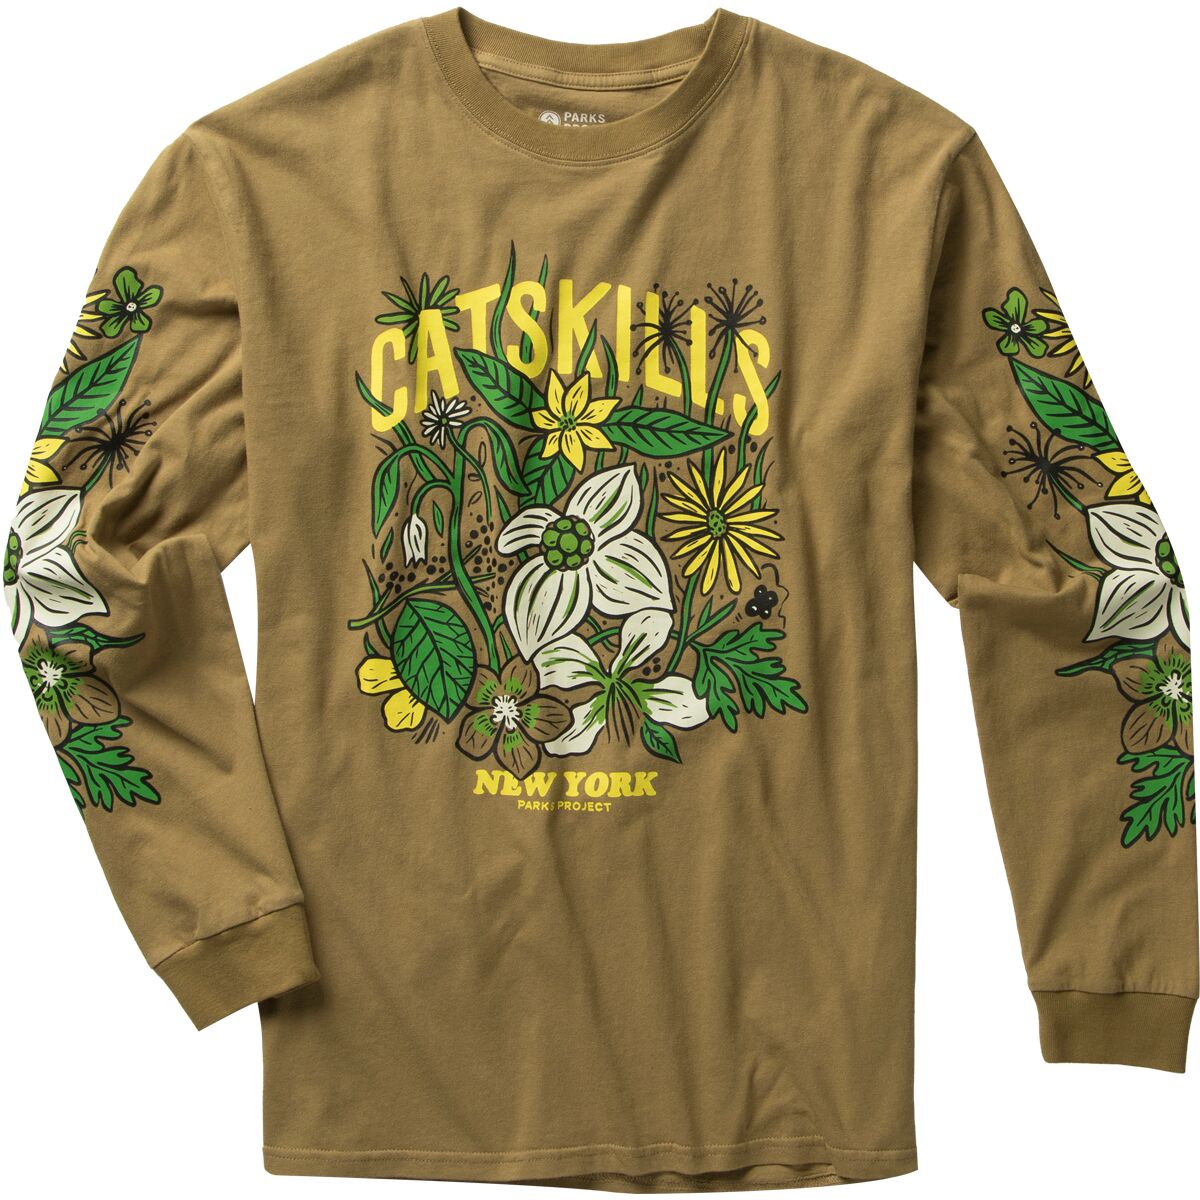 Parks Project Catskills Flower Patch Long-Sleeve T-Shirt